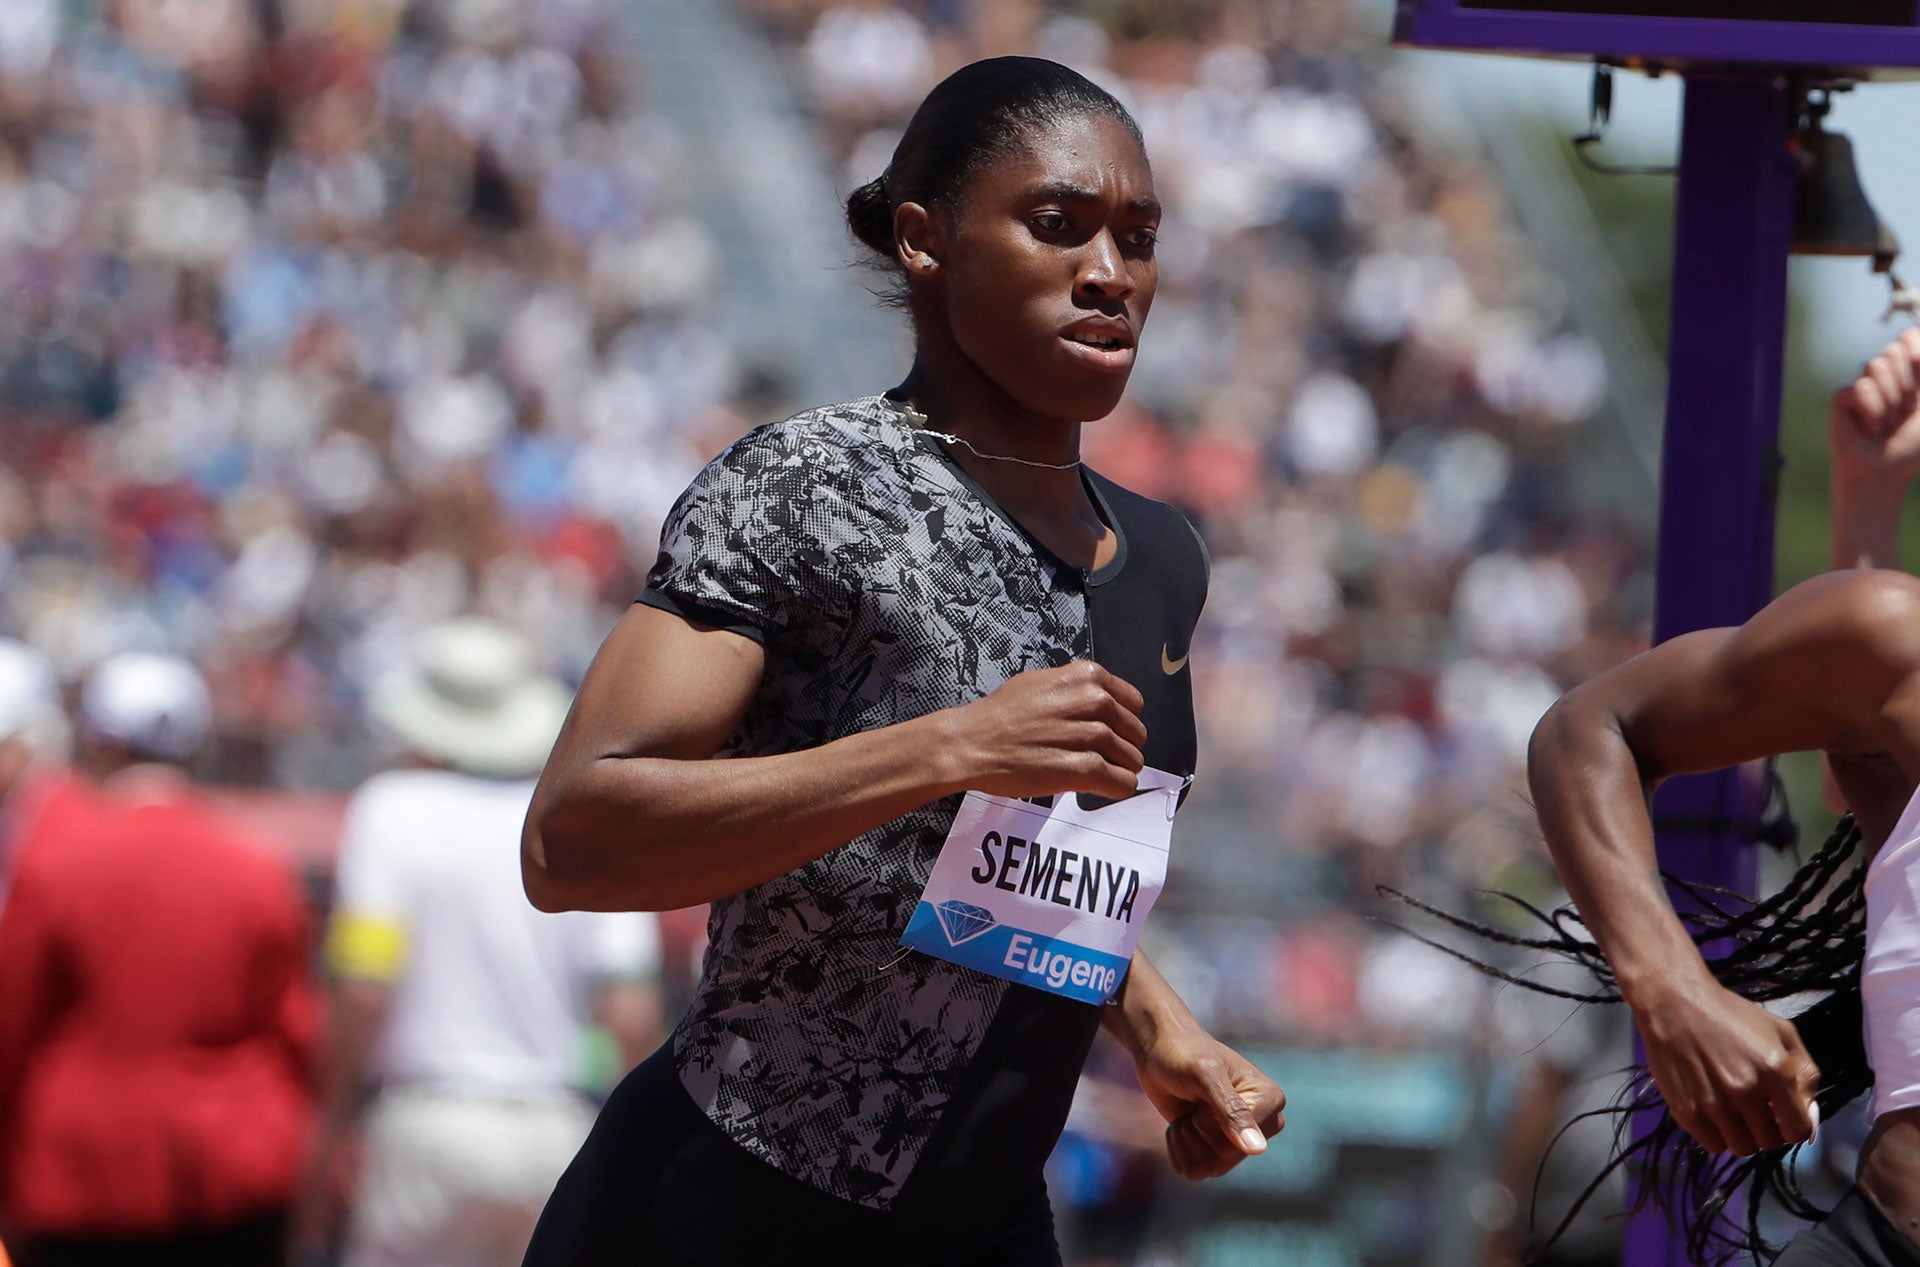 South Africa's Caster Semenya competes in the women's 800-meter race during the Prefontaine Classic, an IAAF Diamond League athletics meeting, in Stanford, California, June 30, 2019.